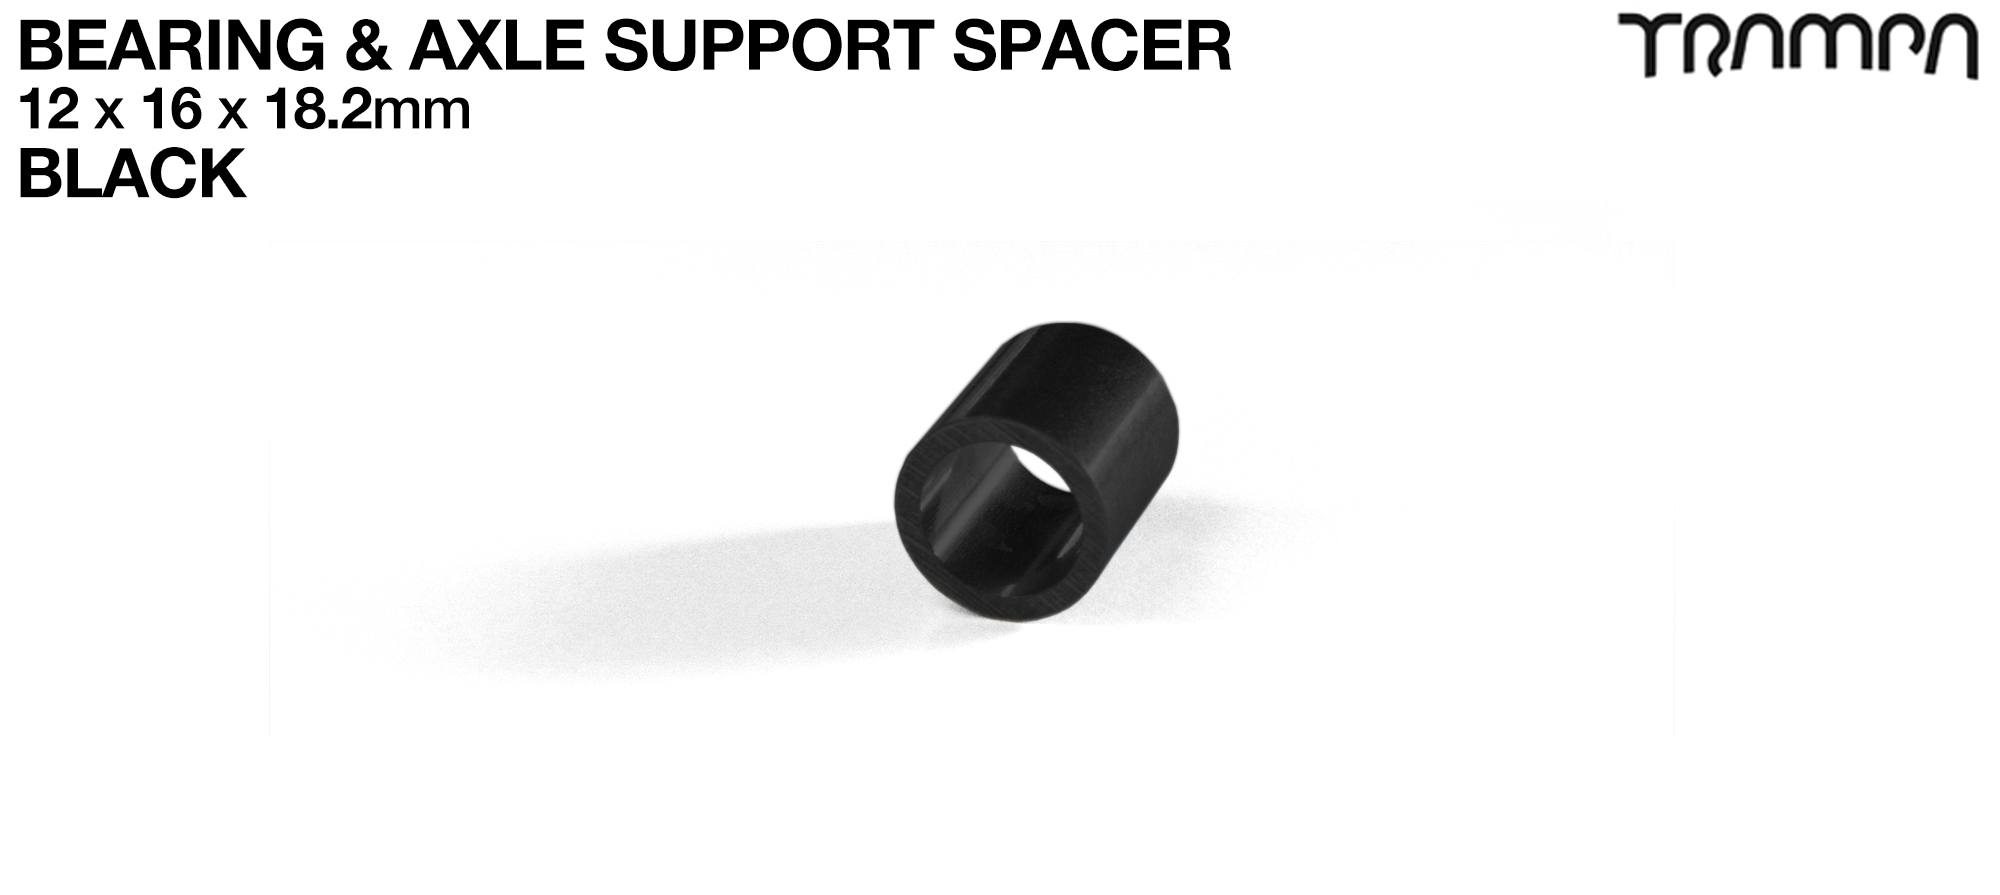 18.2mm Wheel Support Axle Spacers - BLACK x4